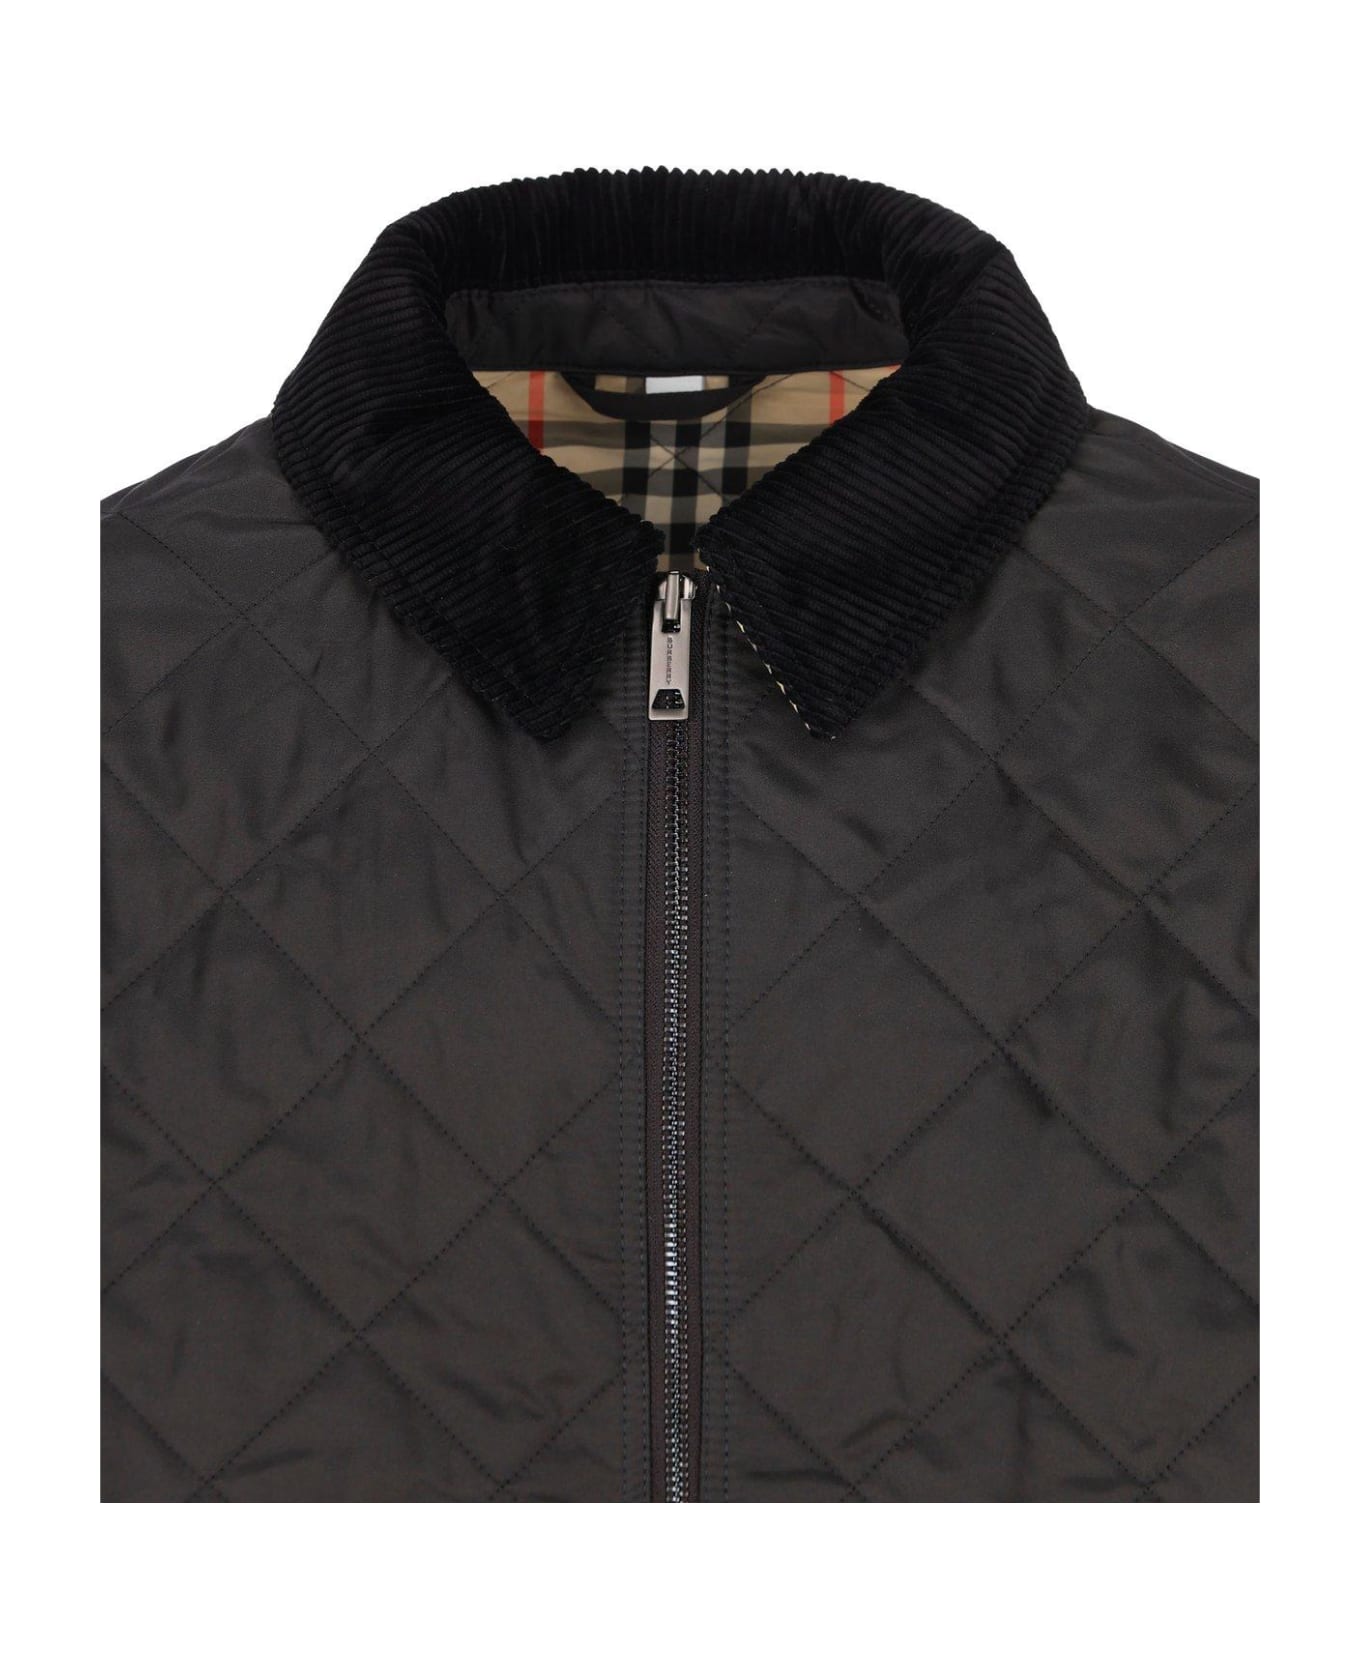 Burberry Diamond Quilted Zipped Jacket - Black